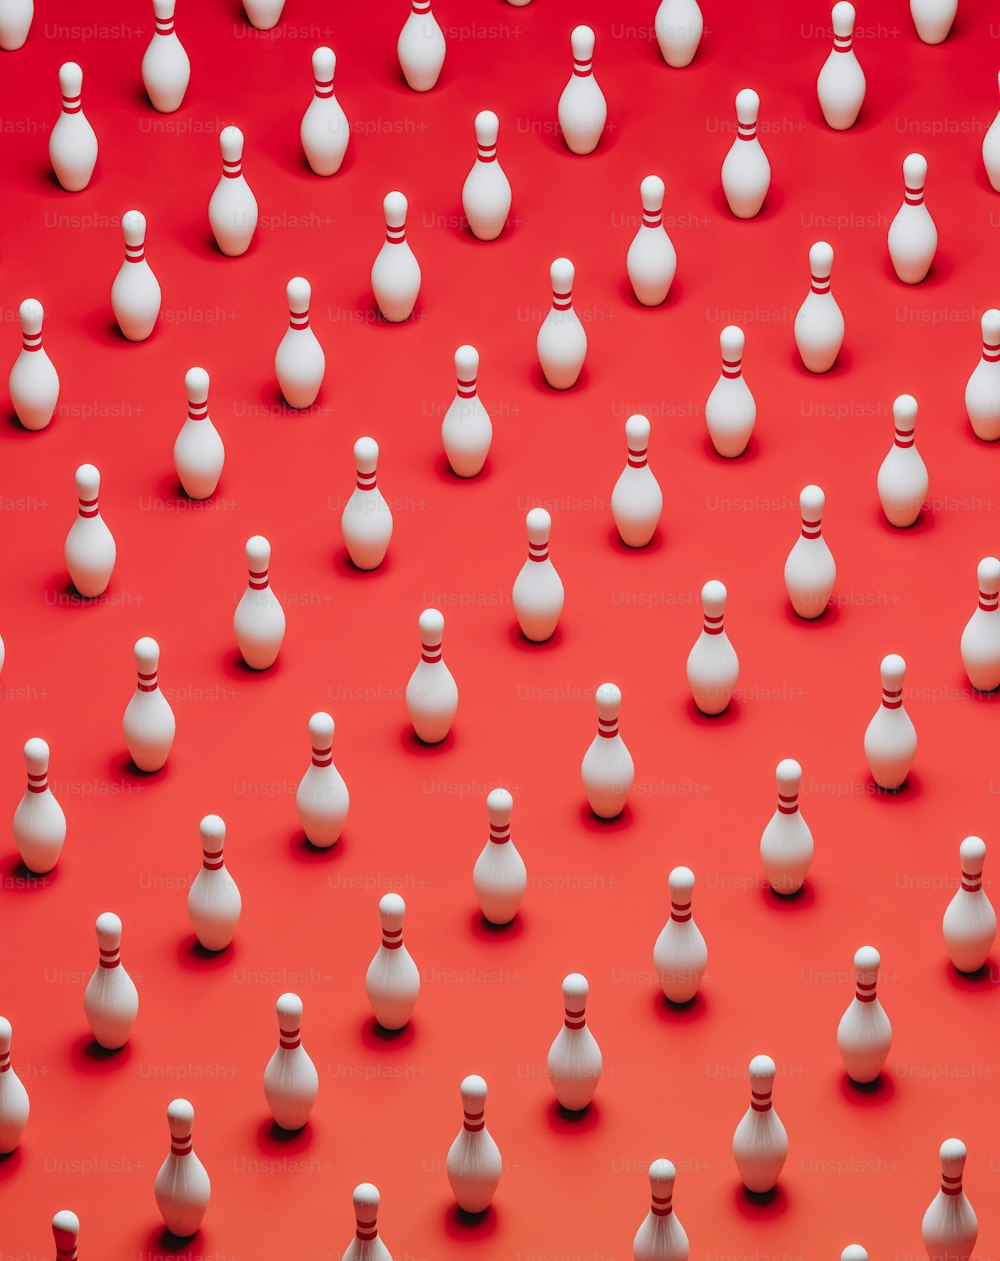 a large group of small white objects on a red background